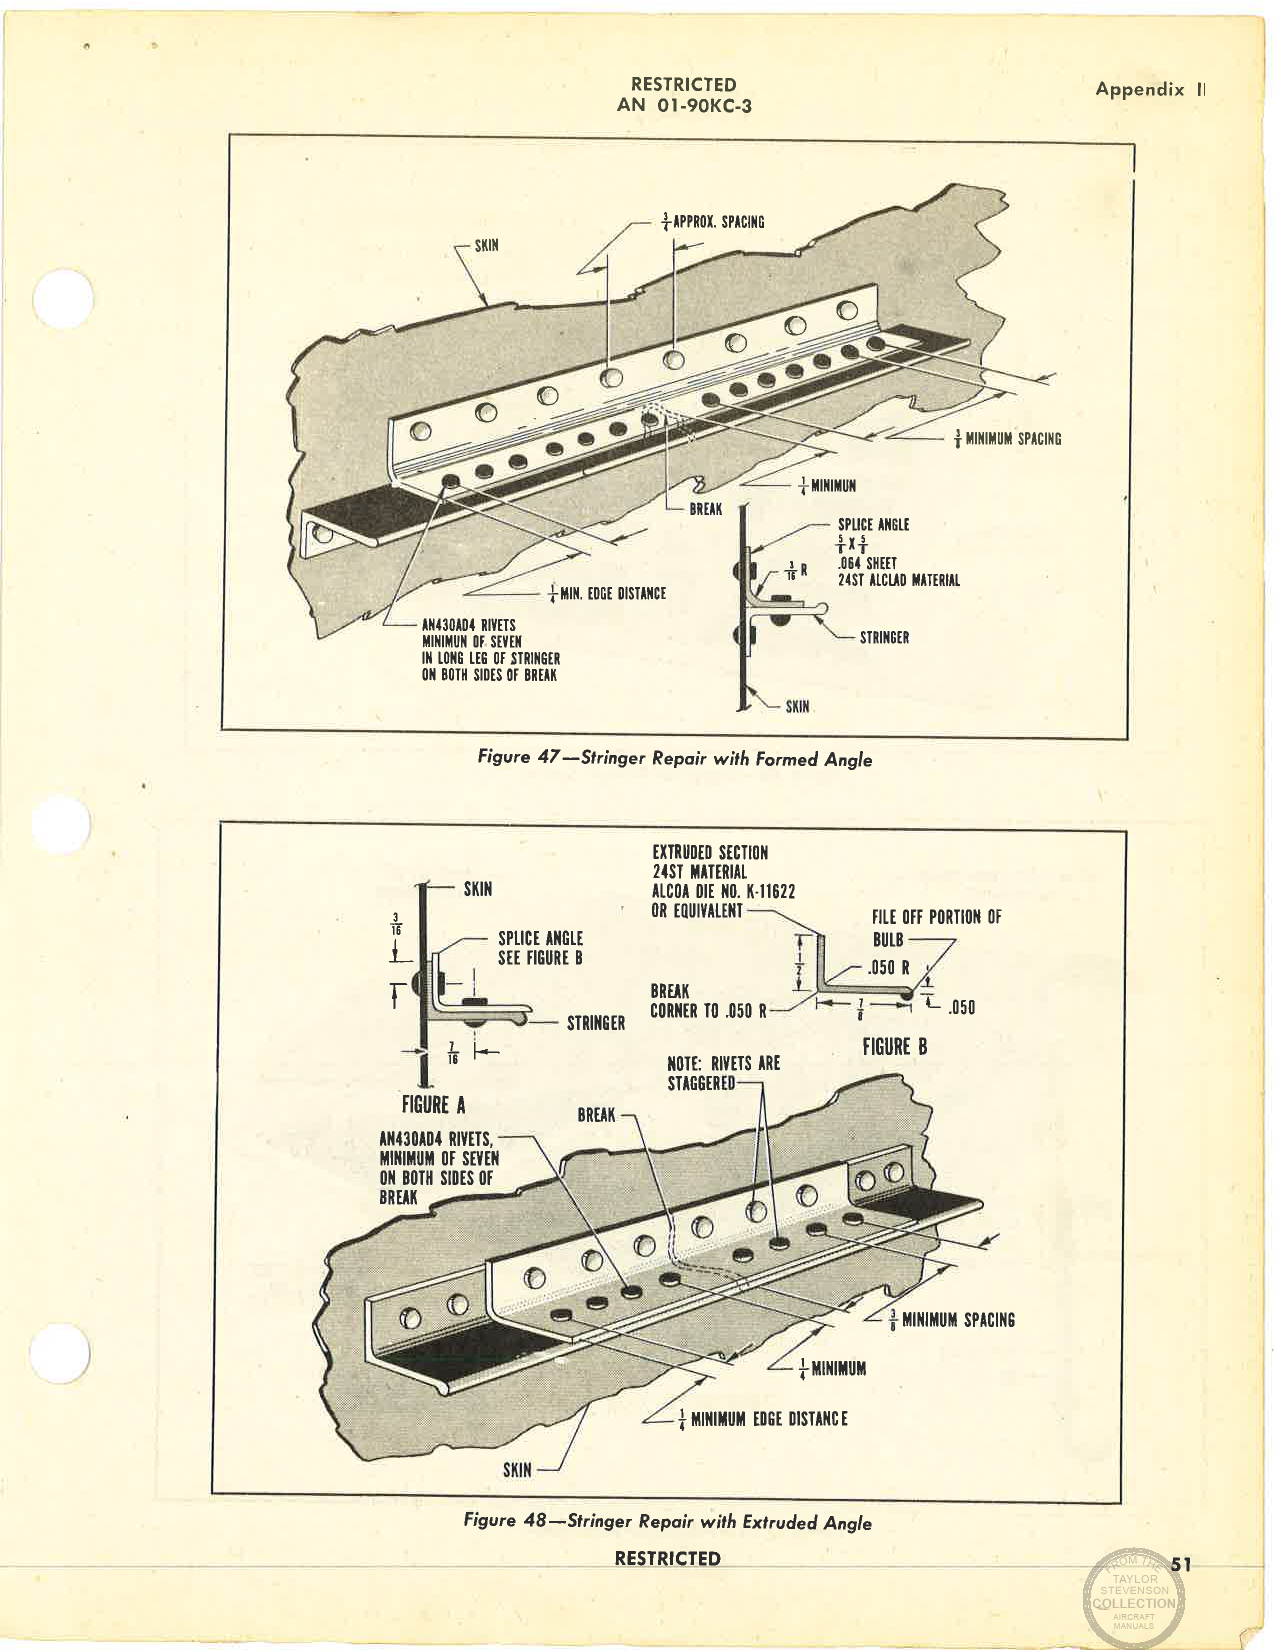 Sample page 55 from AirCorps Library document: Structural Repair Instructions - AT-11